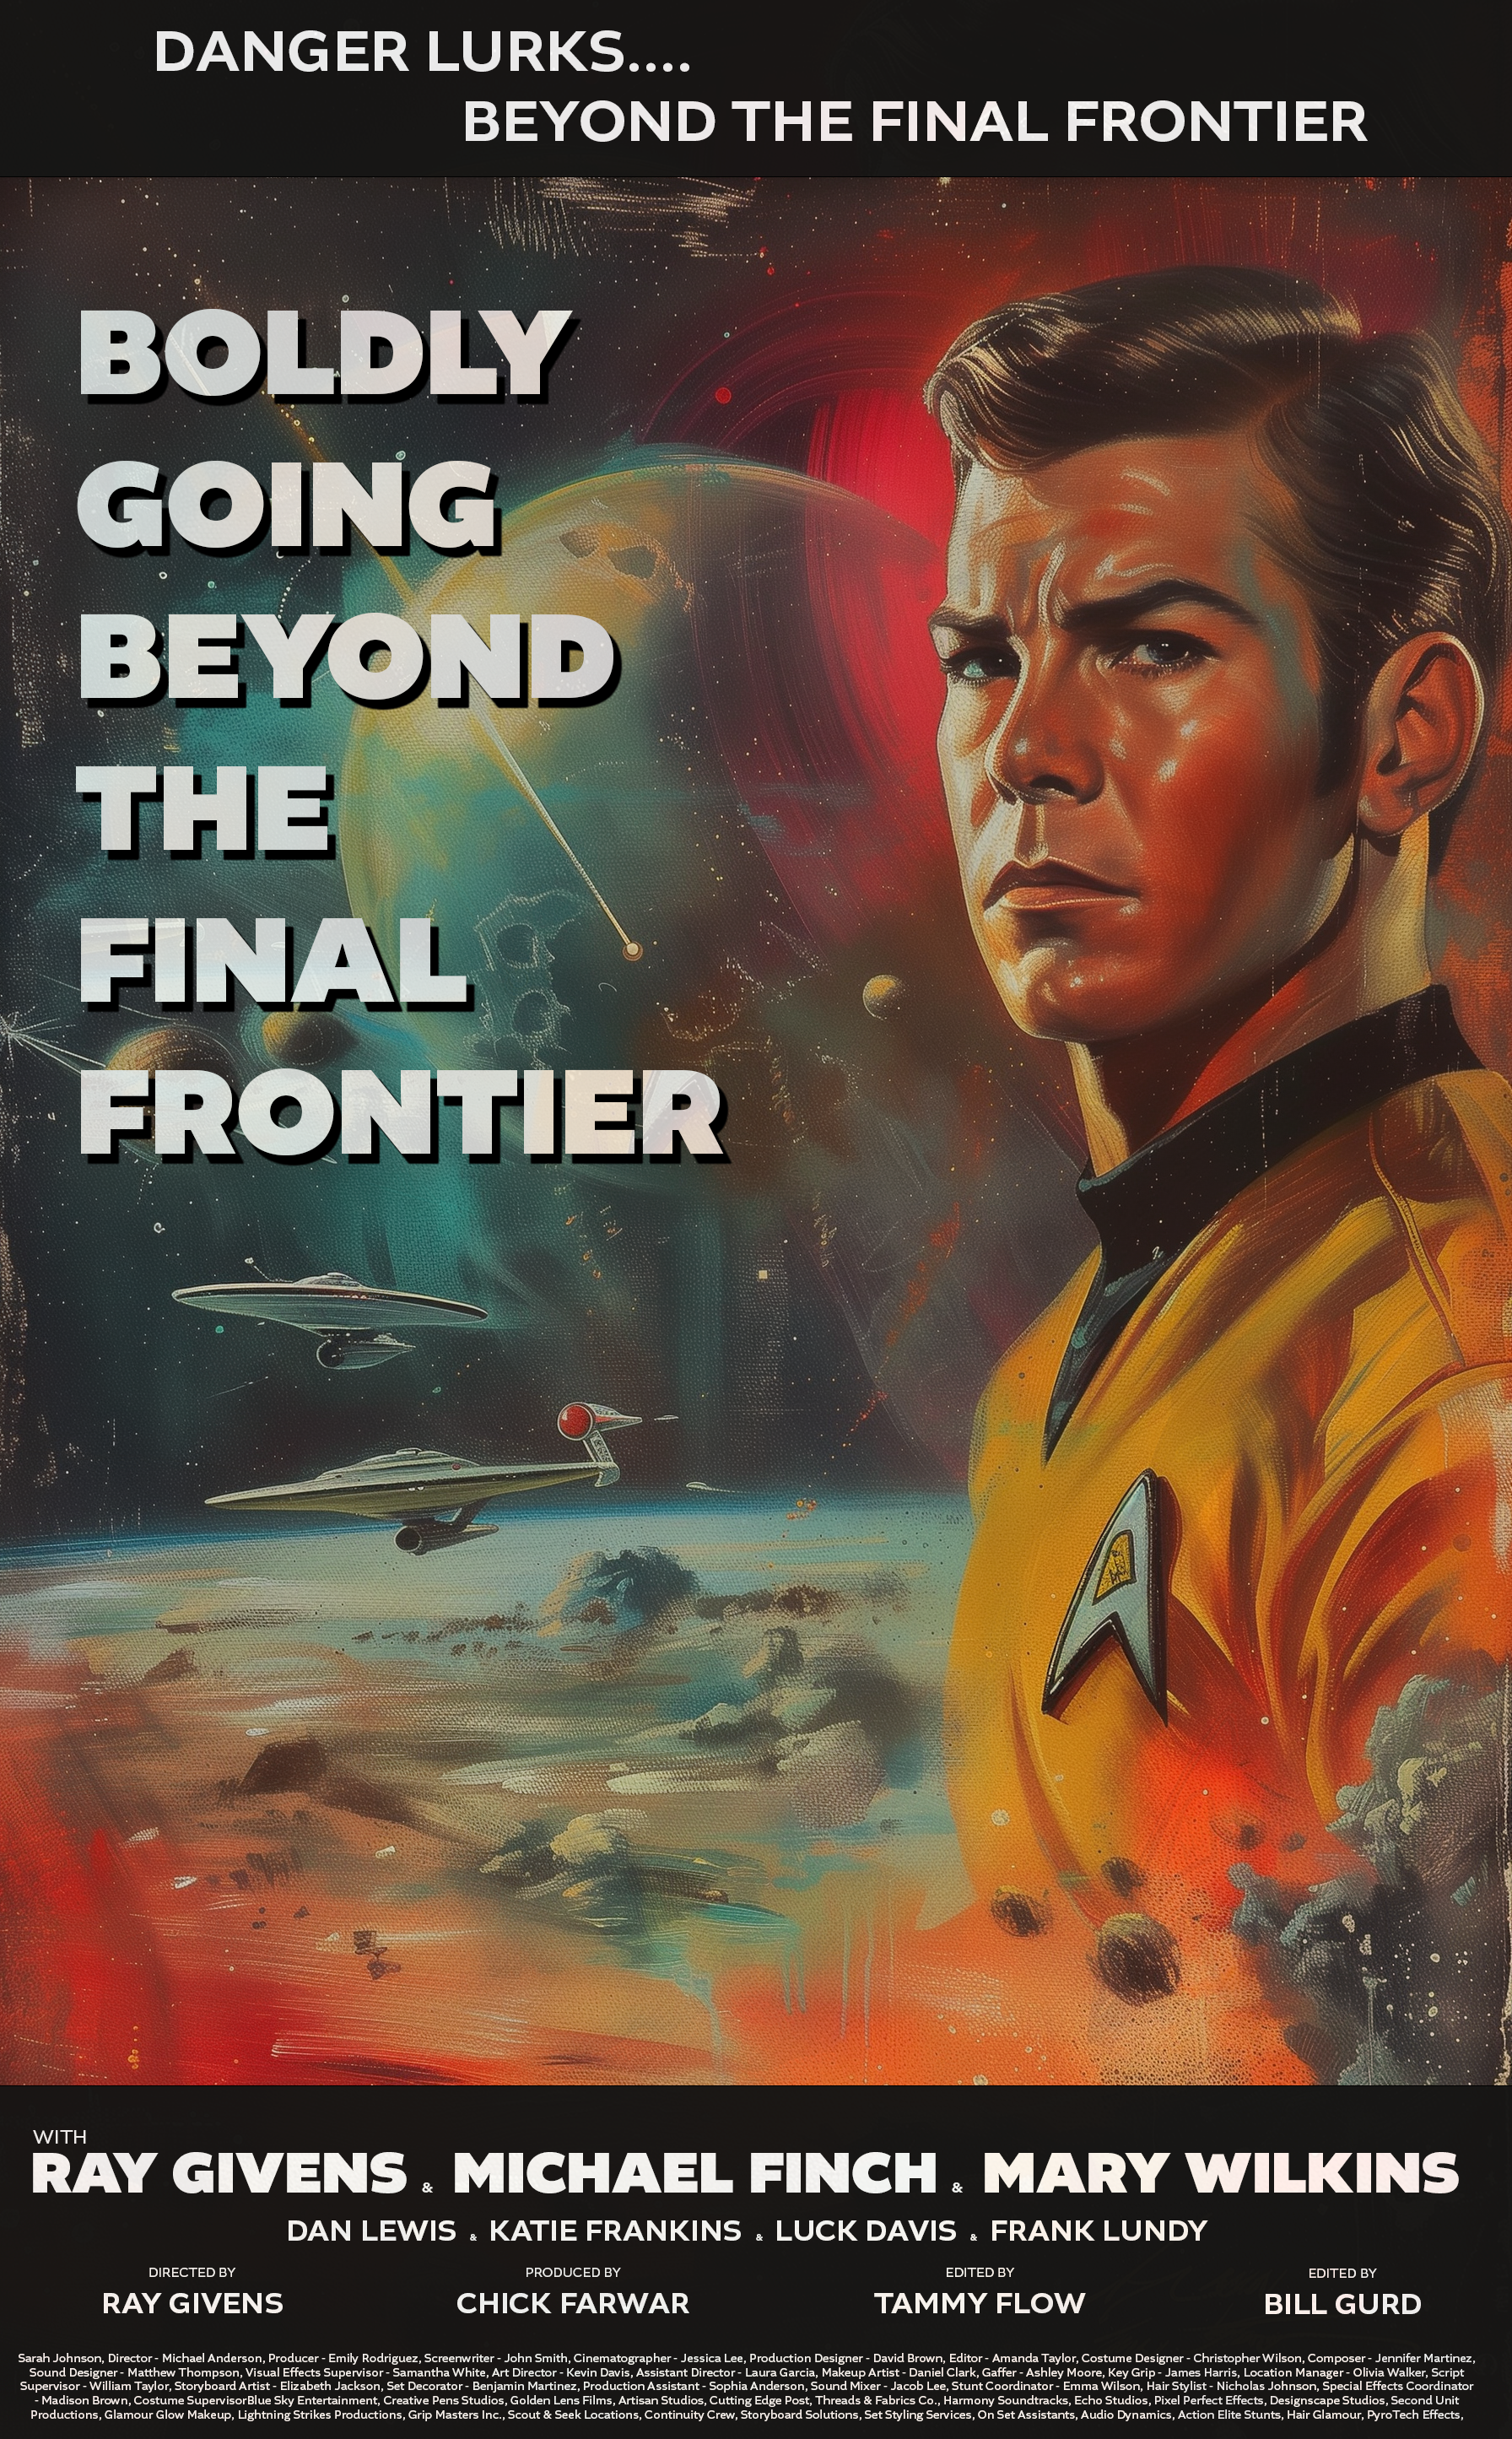 Name:  Beyond the Final Frontier.png
Views: 136
Size:  8.19 MB